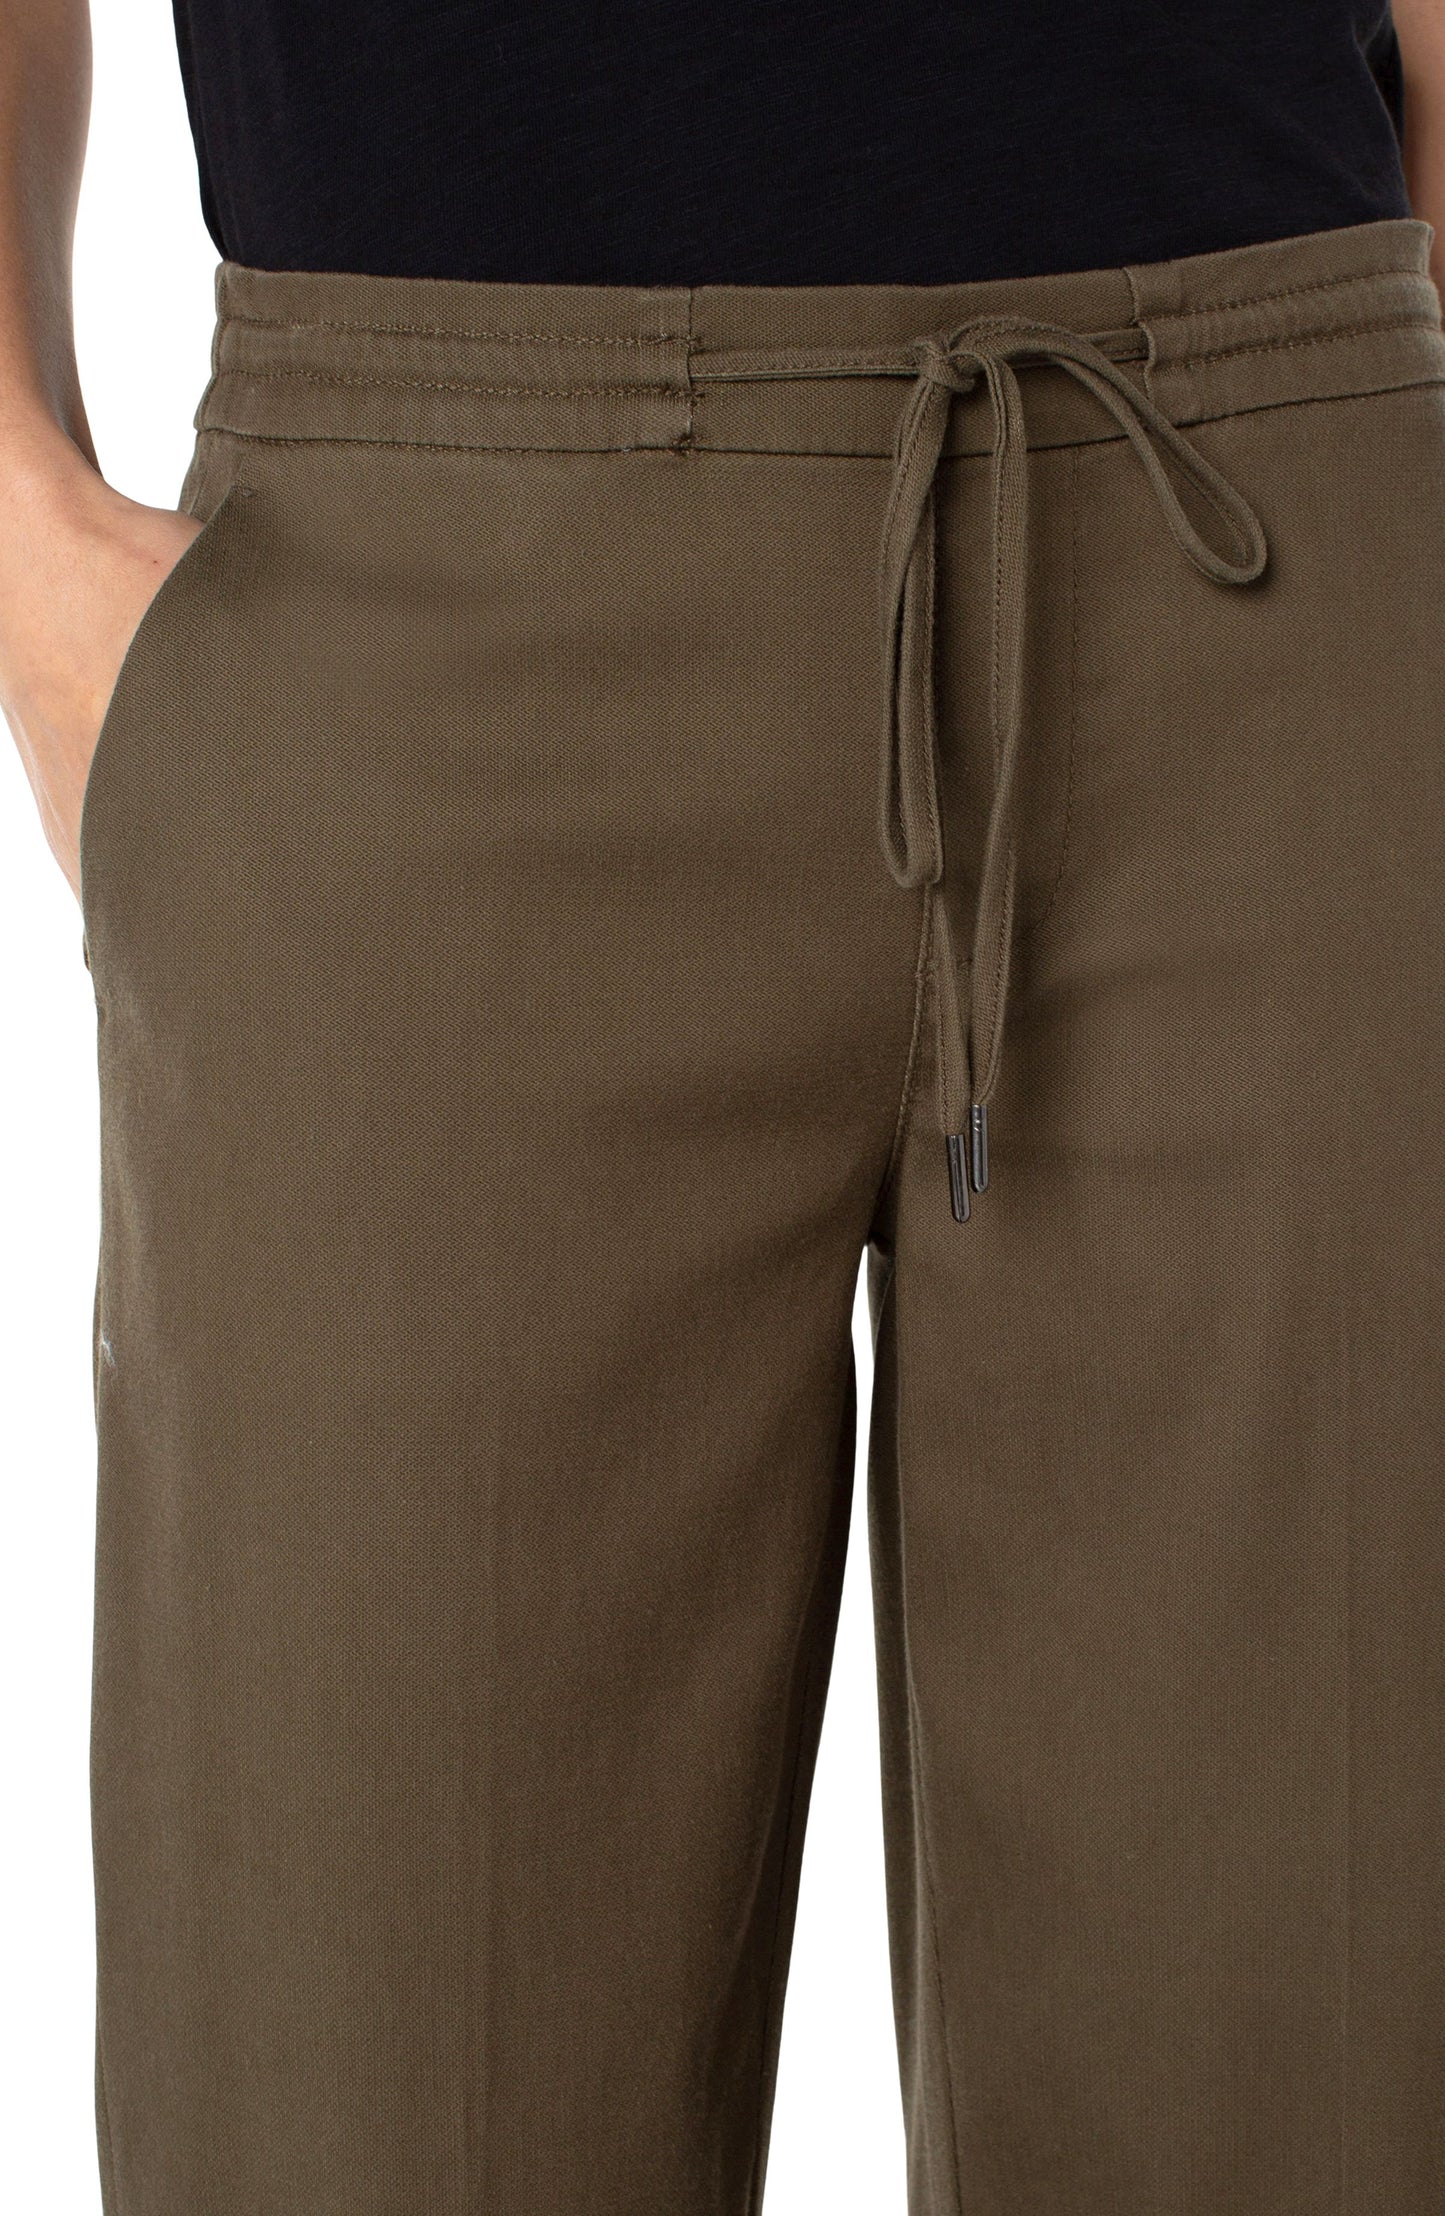 Liverpool Kelsey Culotte w/Tie Waistband Pants (Olive Grove)